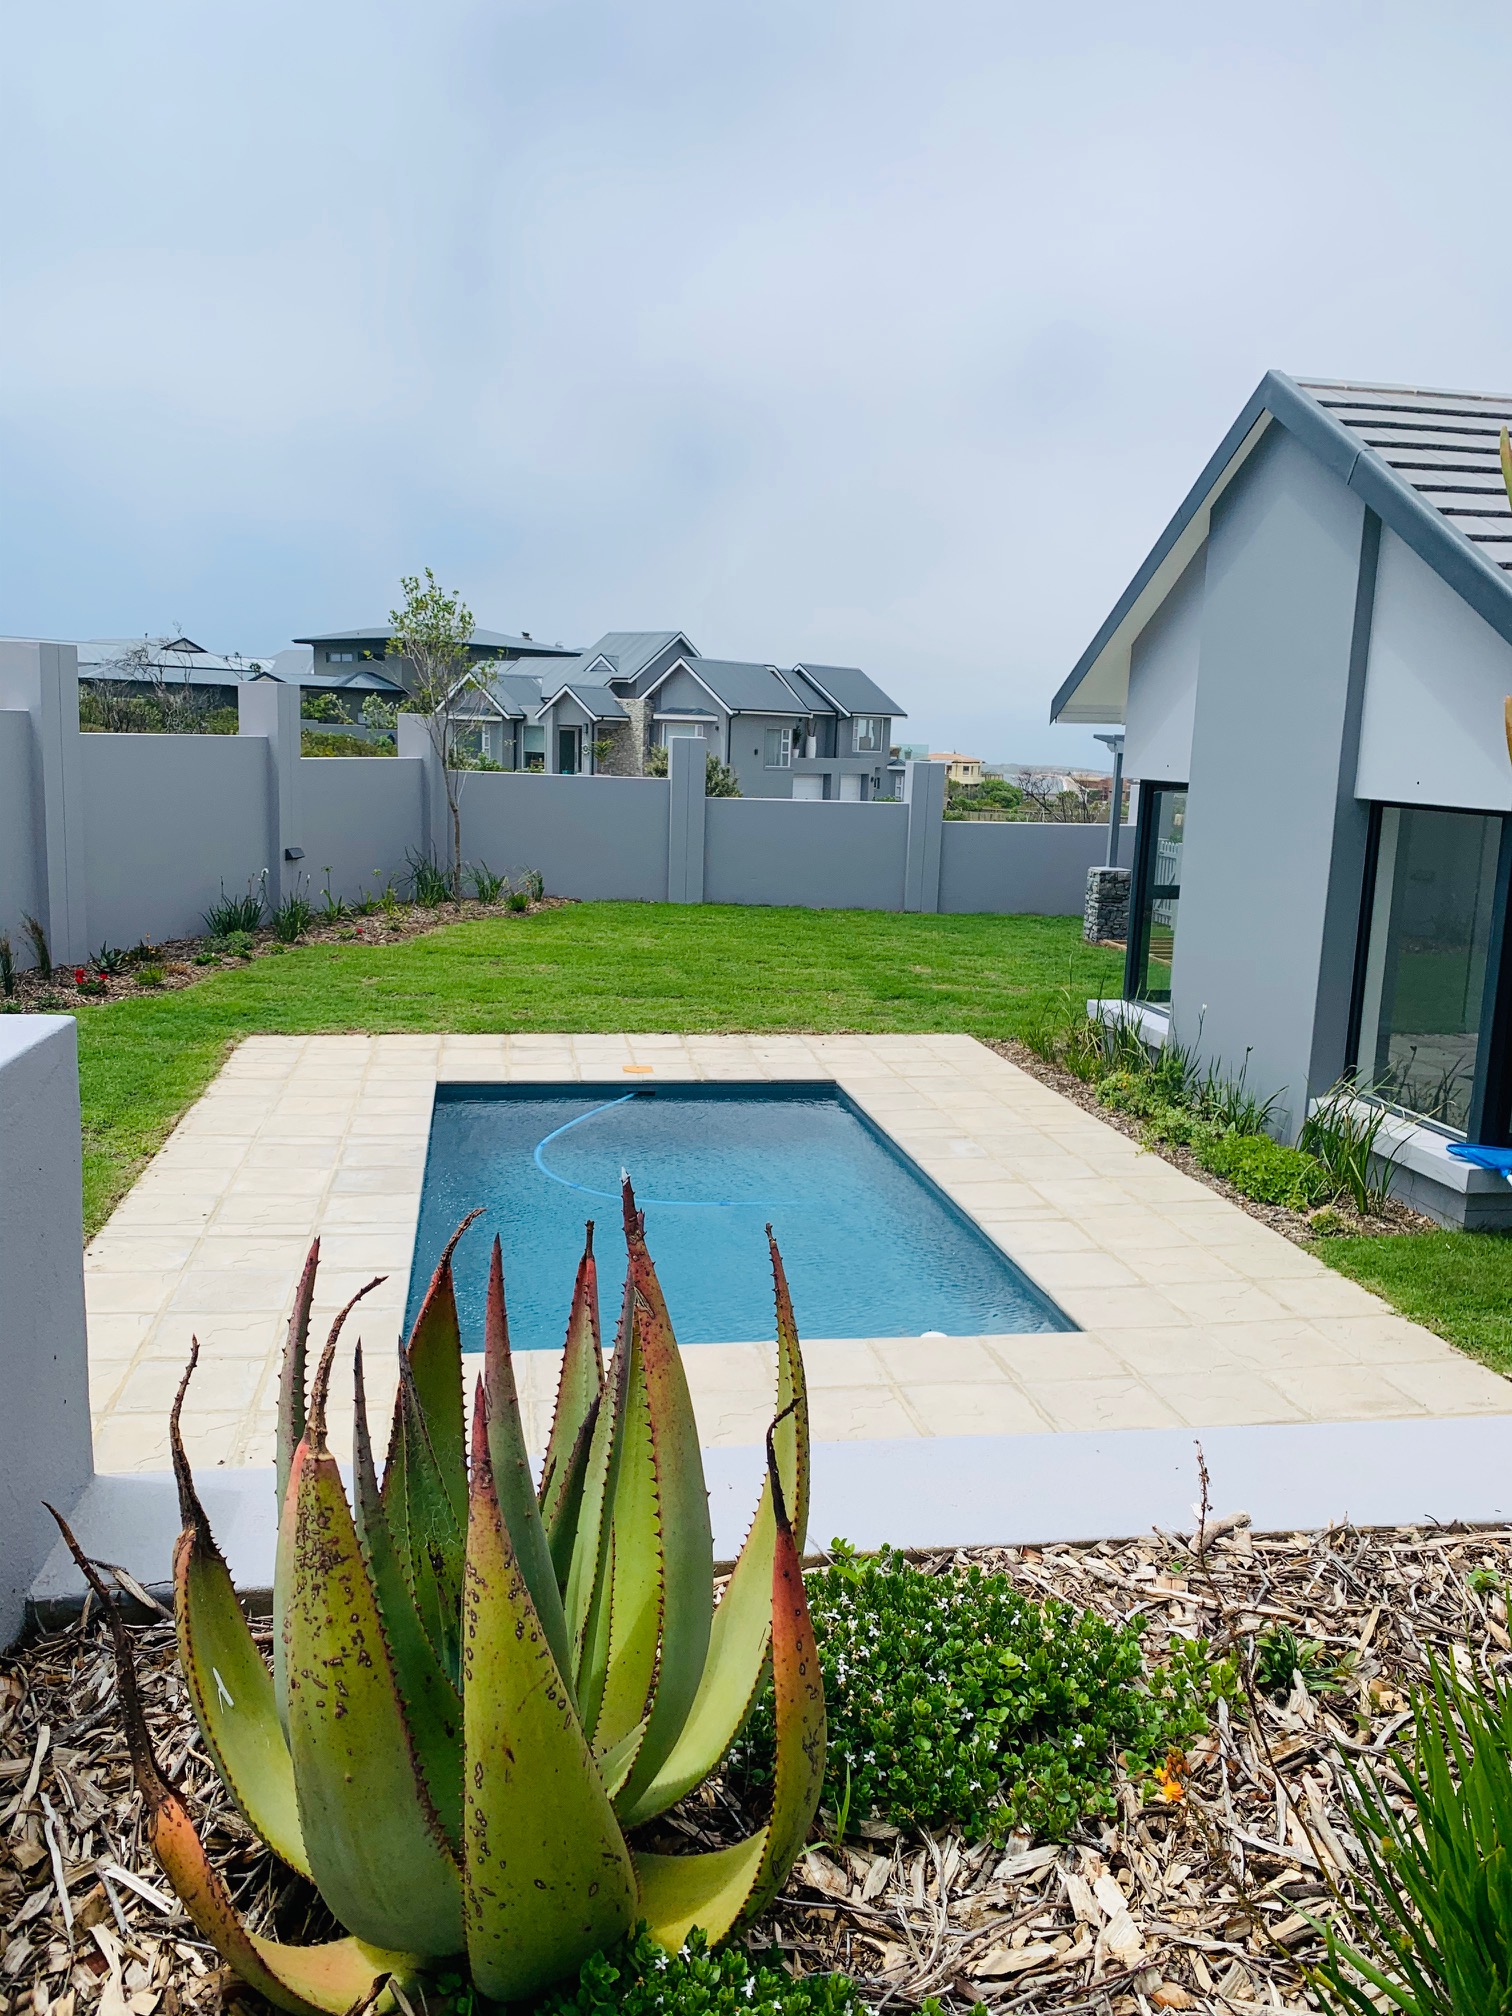 Whale Rock Ridge estate is ranked in the Top 10 residential estates in South Africa.